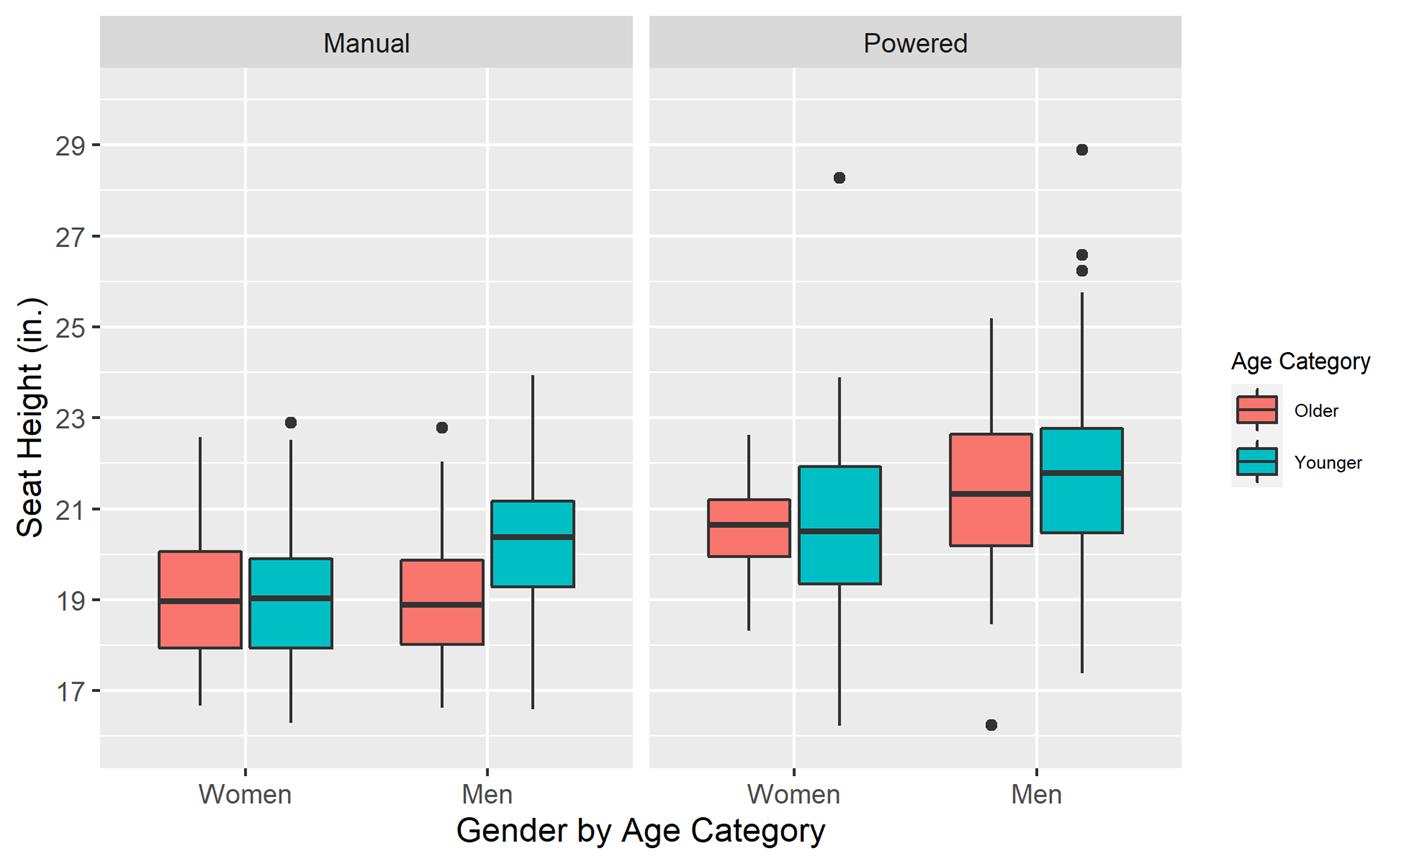 Box plot illustrating eight different groups:  Manual, Powered; Women, Men; then Older and Younger.  The Y axis is Seat Height in inches, from 17 to 29.  The X axis is Gender by Age Category.  Boxes alternate horizontally red and blue, with a thick horizontal line dividing each.  The first three boxes are.approximately aligned at the same level, the next three a little higher, and the final two boxes a little higher still. A key to the right indicates that for Age Category, red is used for Older and blue for Younger.  A vertical line above and below each box, and a few dots above or below some, indicates minimum and maximum values of each group along with statistical outliers.  Numerical values follow in Table 2.